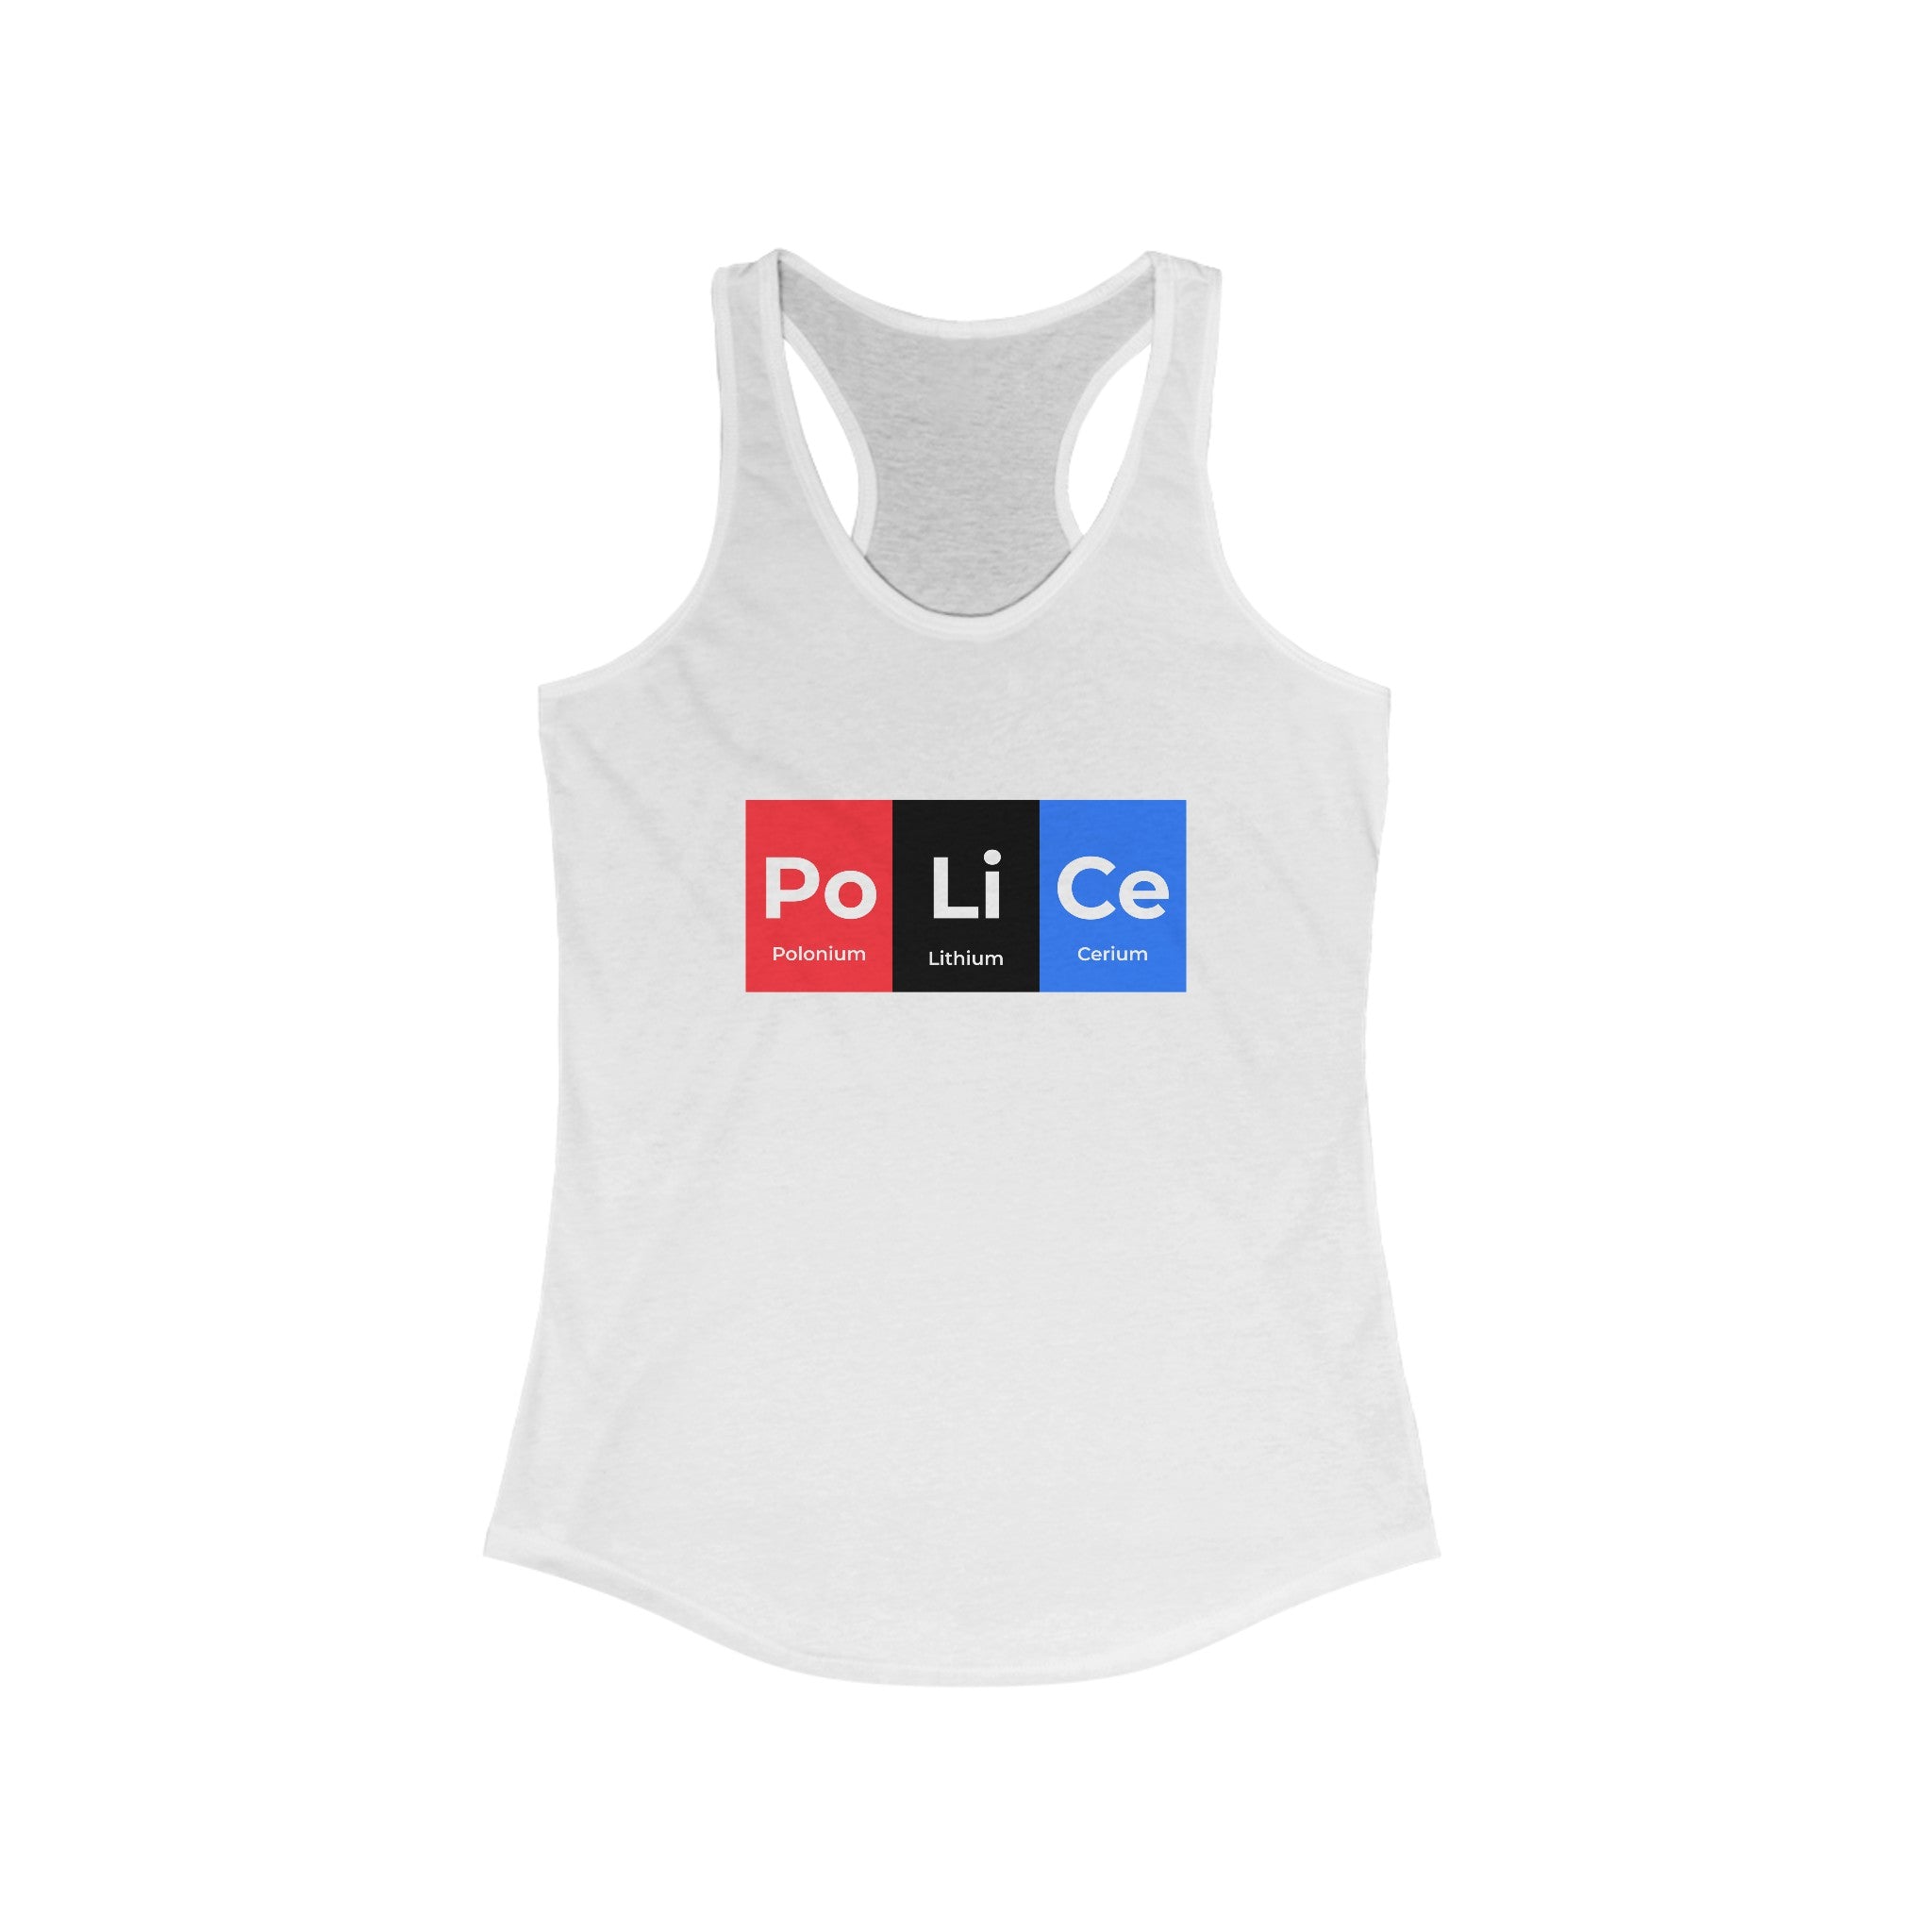 Po-Li-Ce - Women's Racerback Tank featuring the word "PoLiCe" on the front, designed using the periodic table symbols for Polonium (Po), Lithium (Li), and Cerium (Ce). The letters are set against red, black, and blue backgrounds. Perfect for those with an active lifestyle.